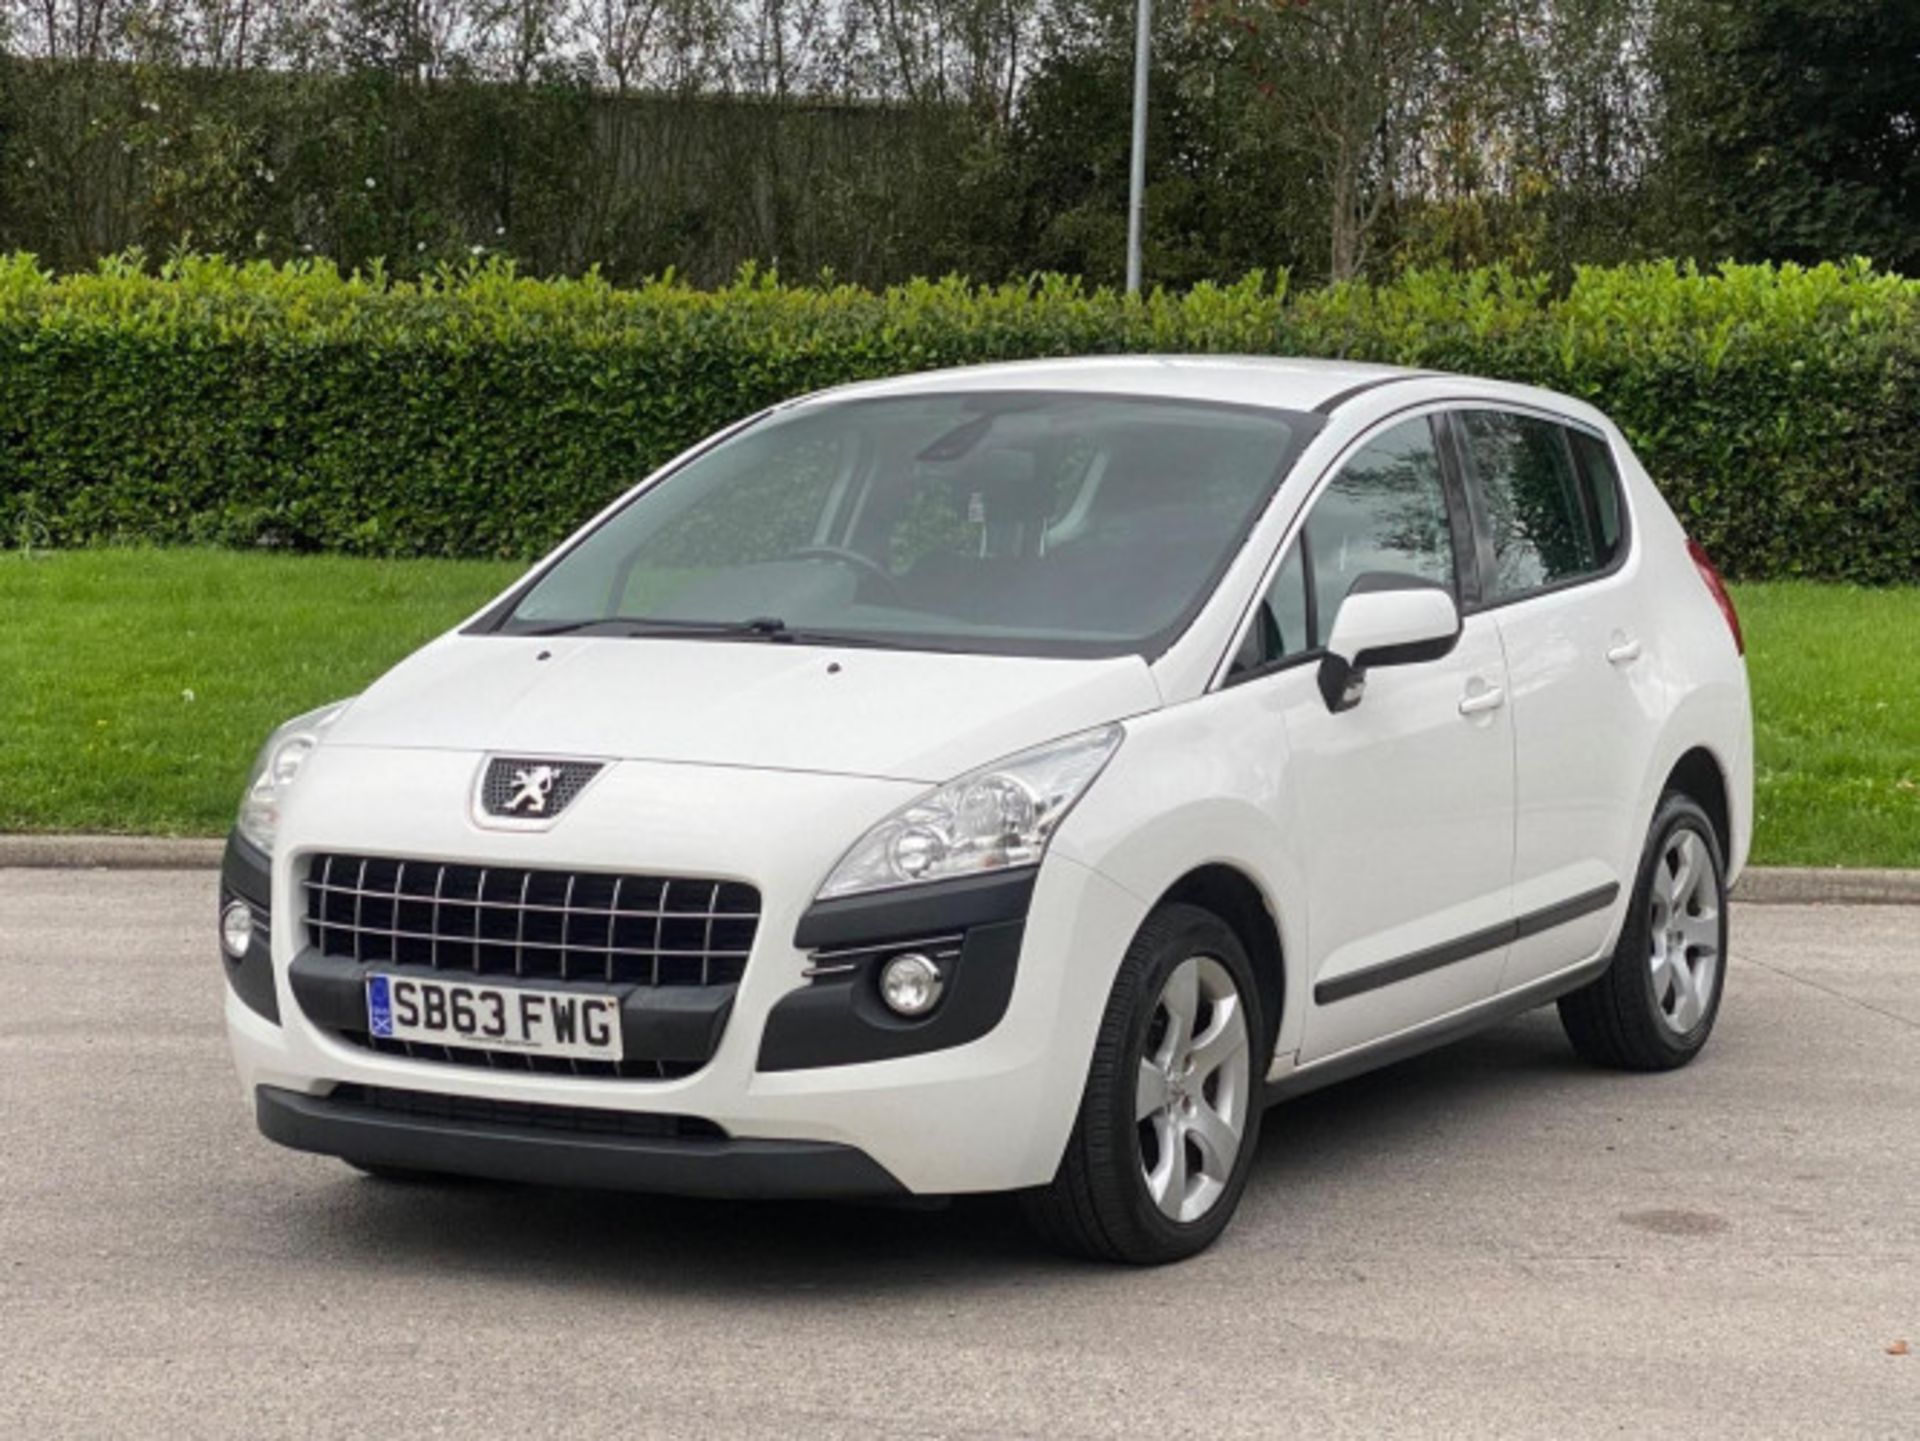 2013 PEUGEOT 3008 1.6 HDI ACTIVE EURO 5 5DR >>--NO VAT ON HAMMER--<< - Image 98 of 104